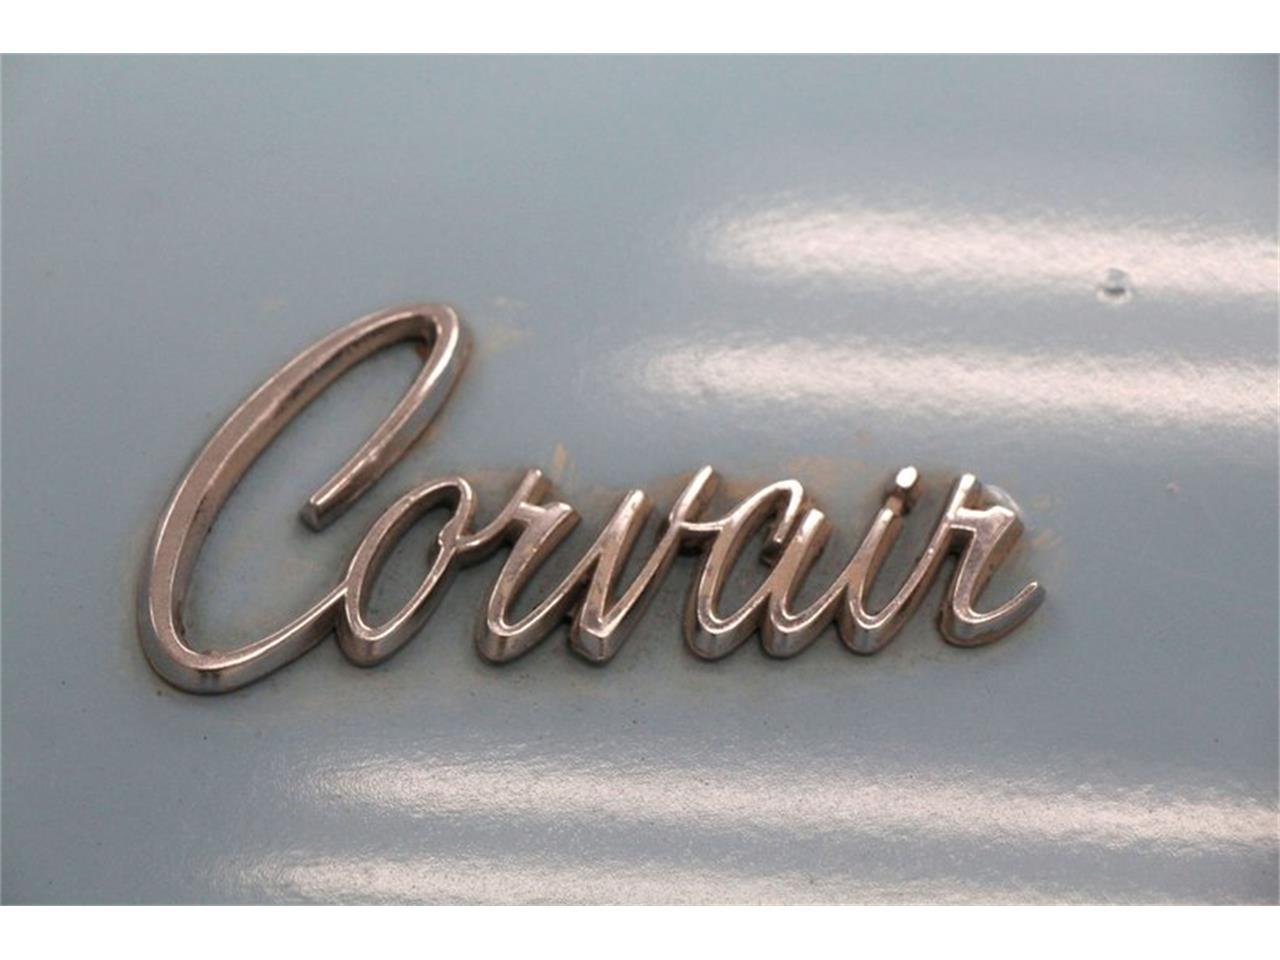 1965 Chevrolet Corvair for sale in Morgantown, PA – photo 9